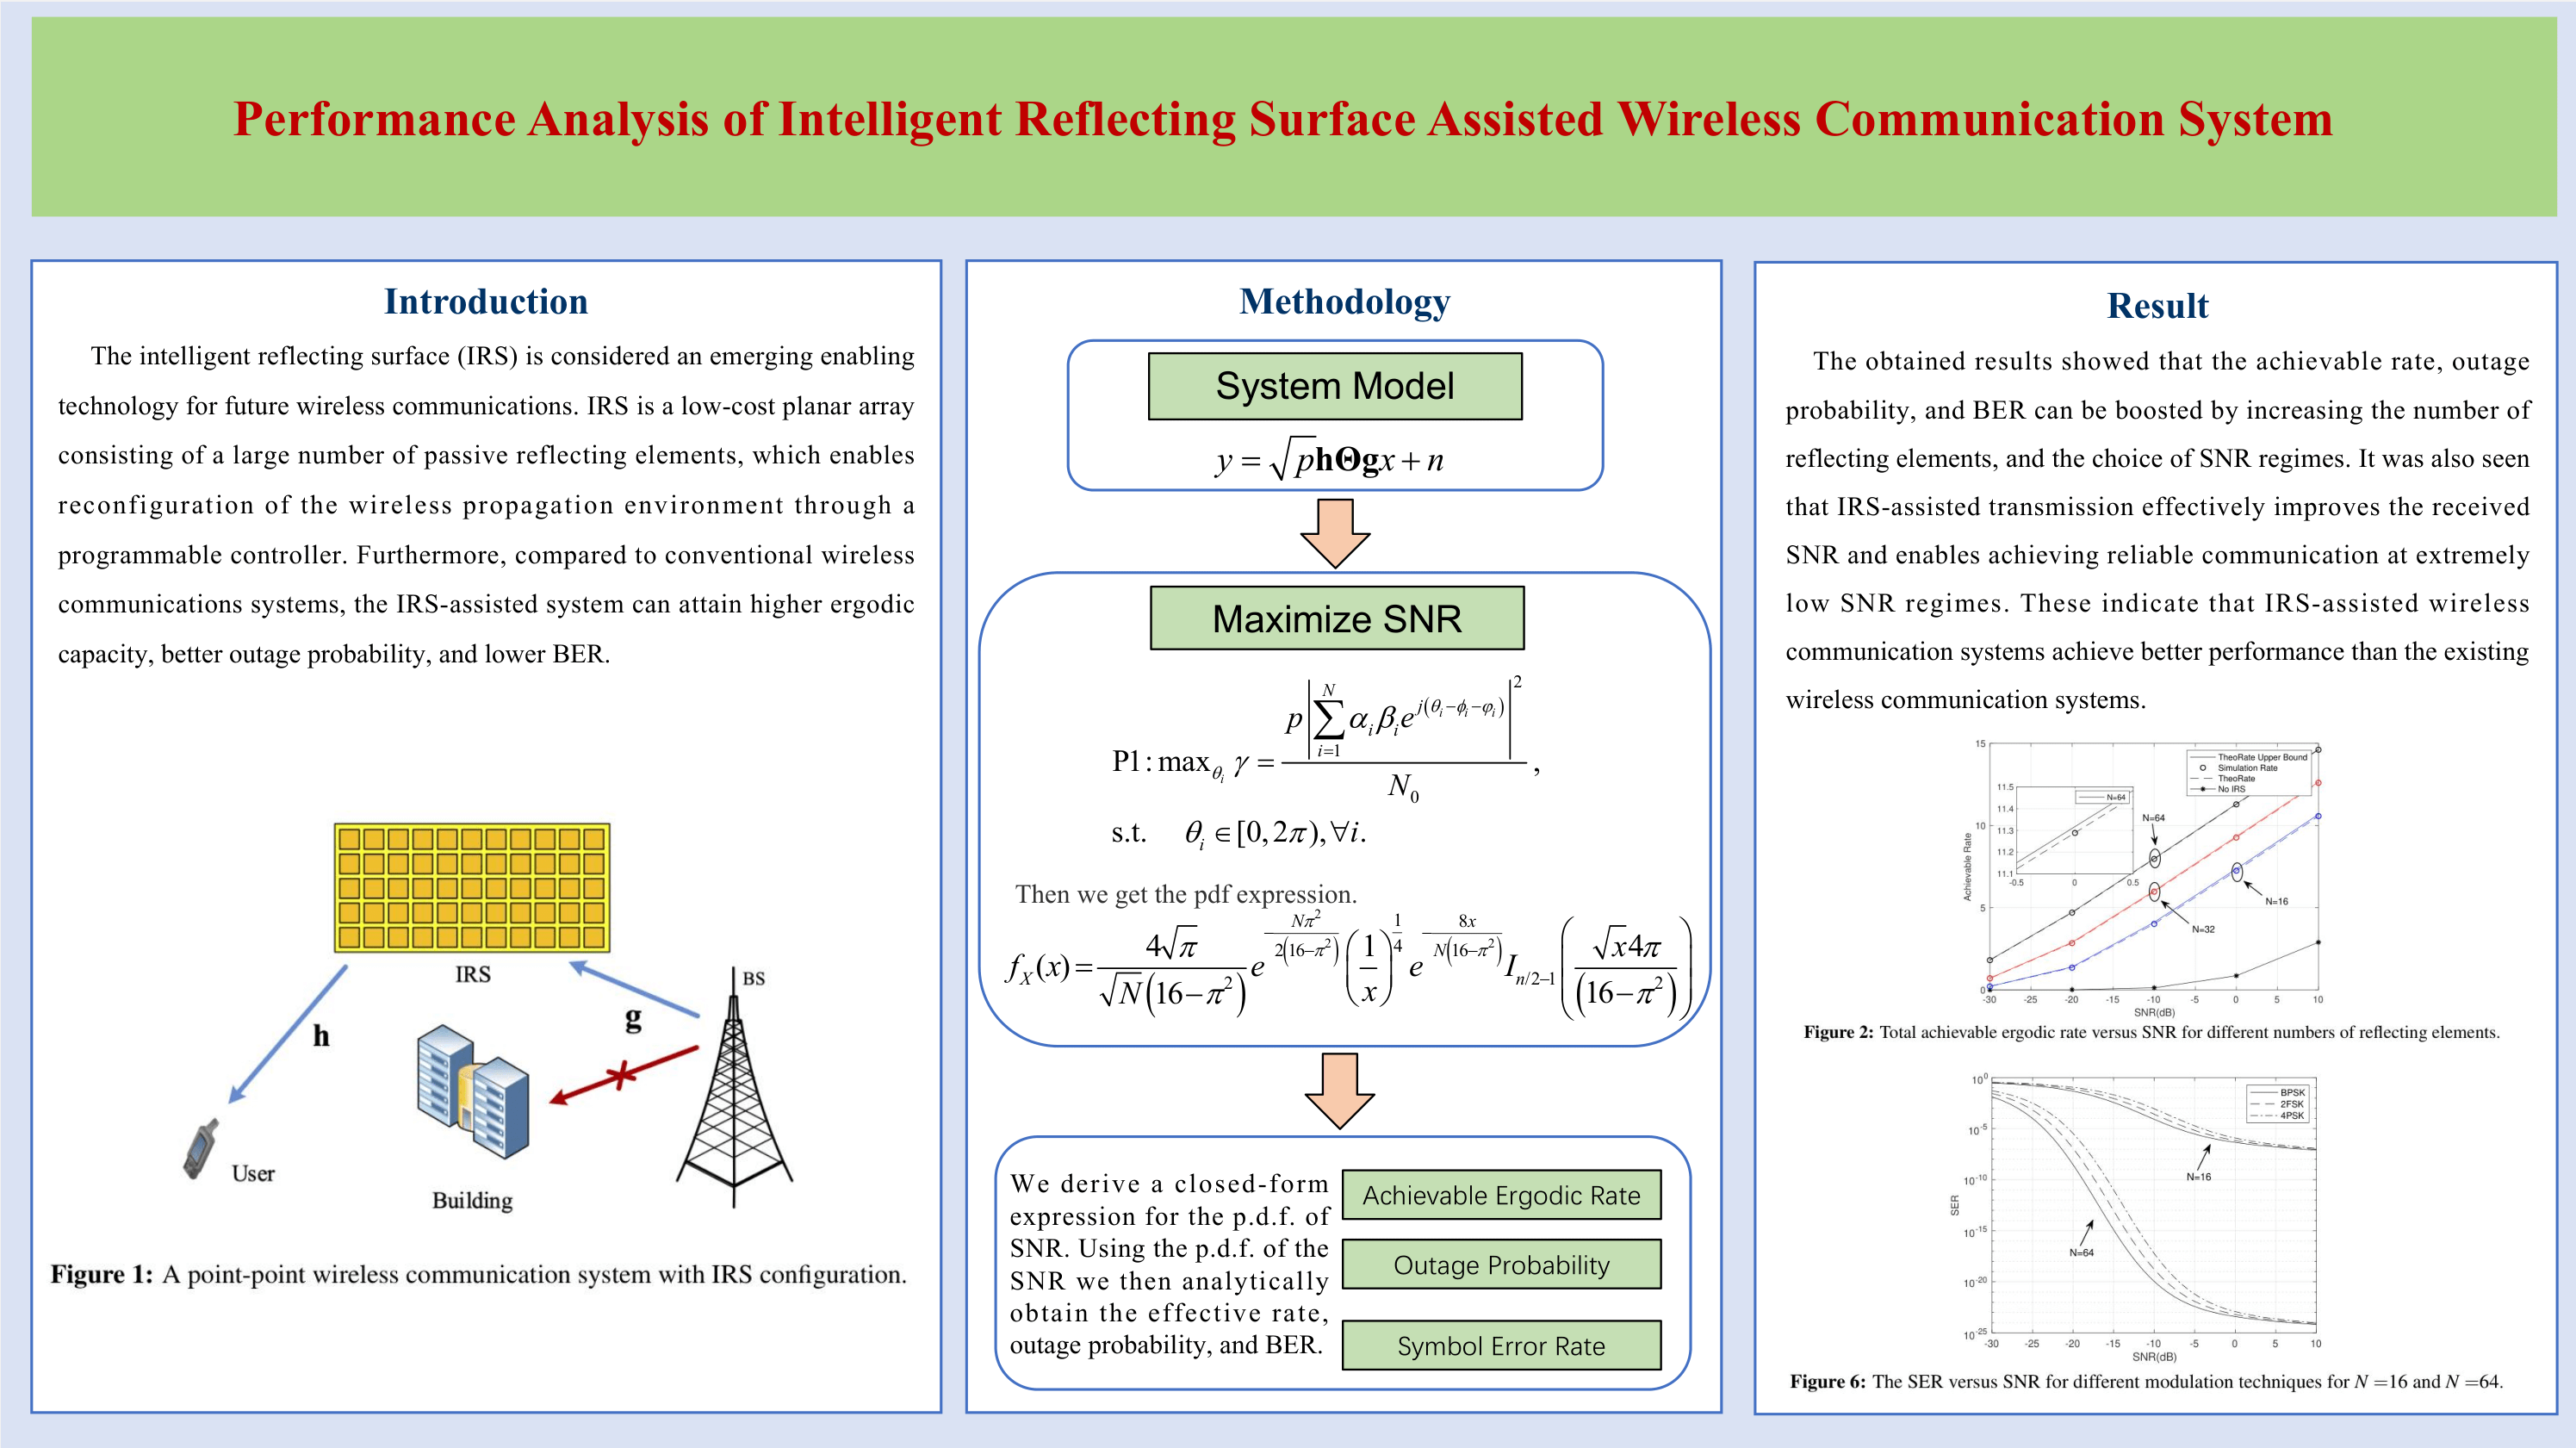 Performance Analysis of Intelligent Reflecting Surface Assisted Wireless Communication System